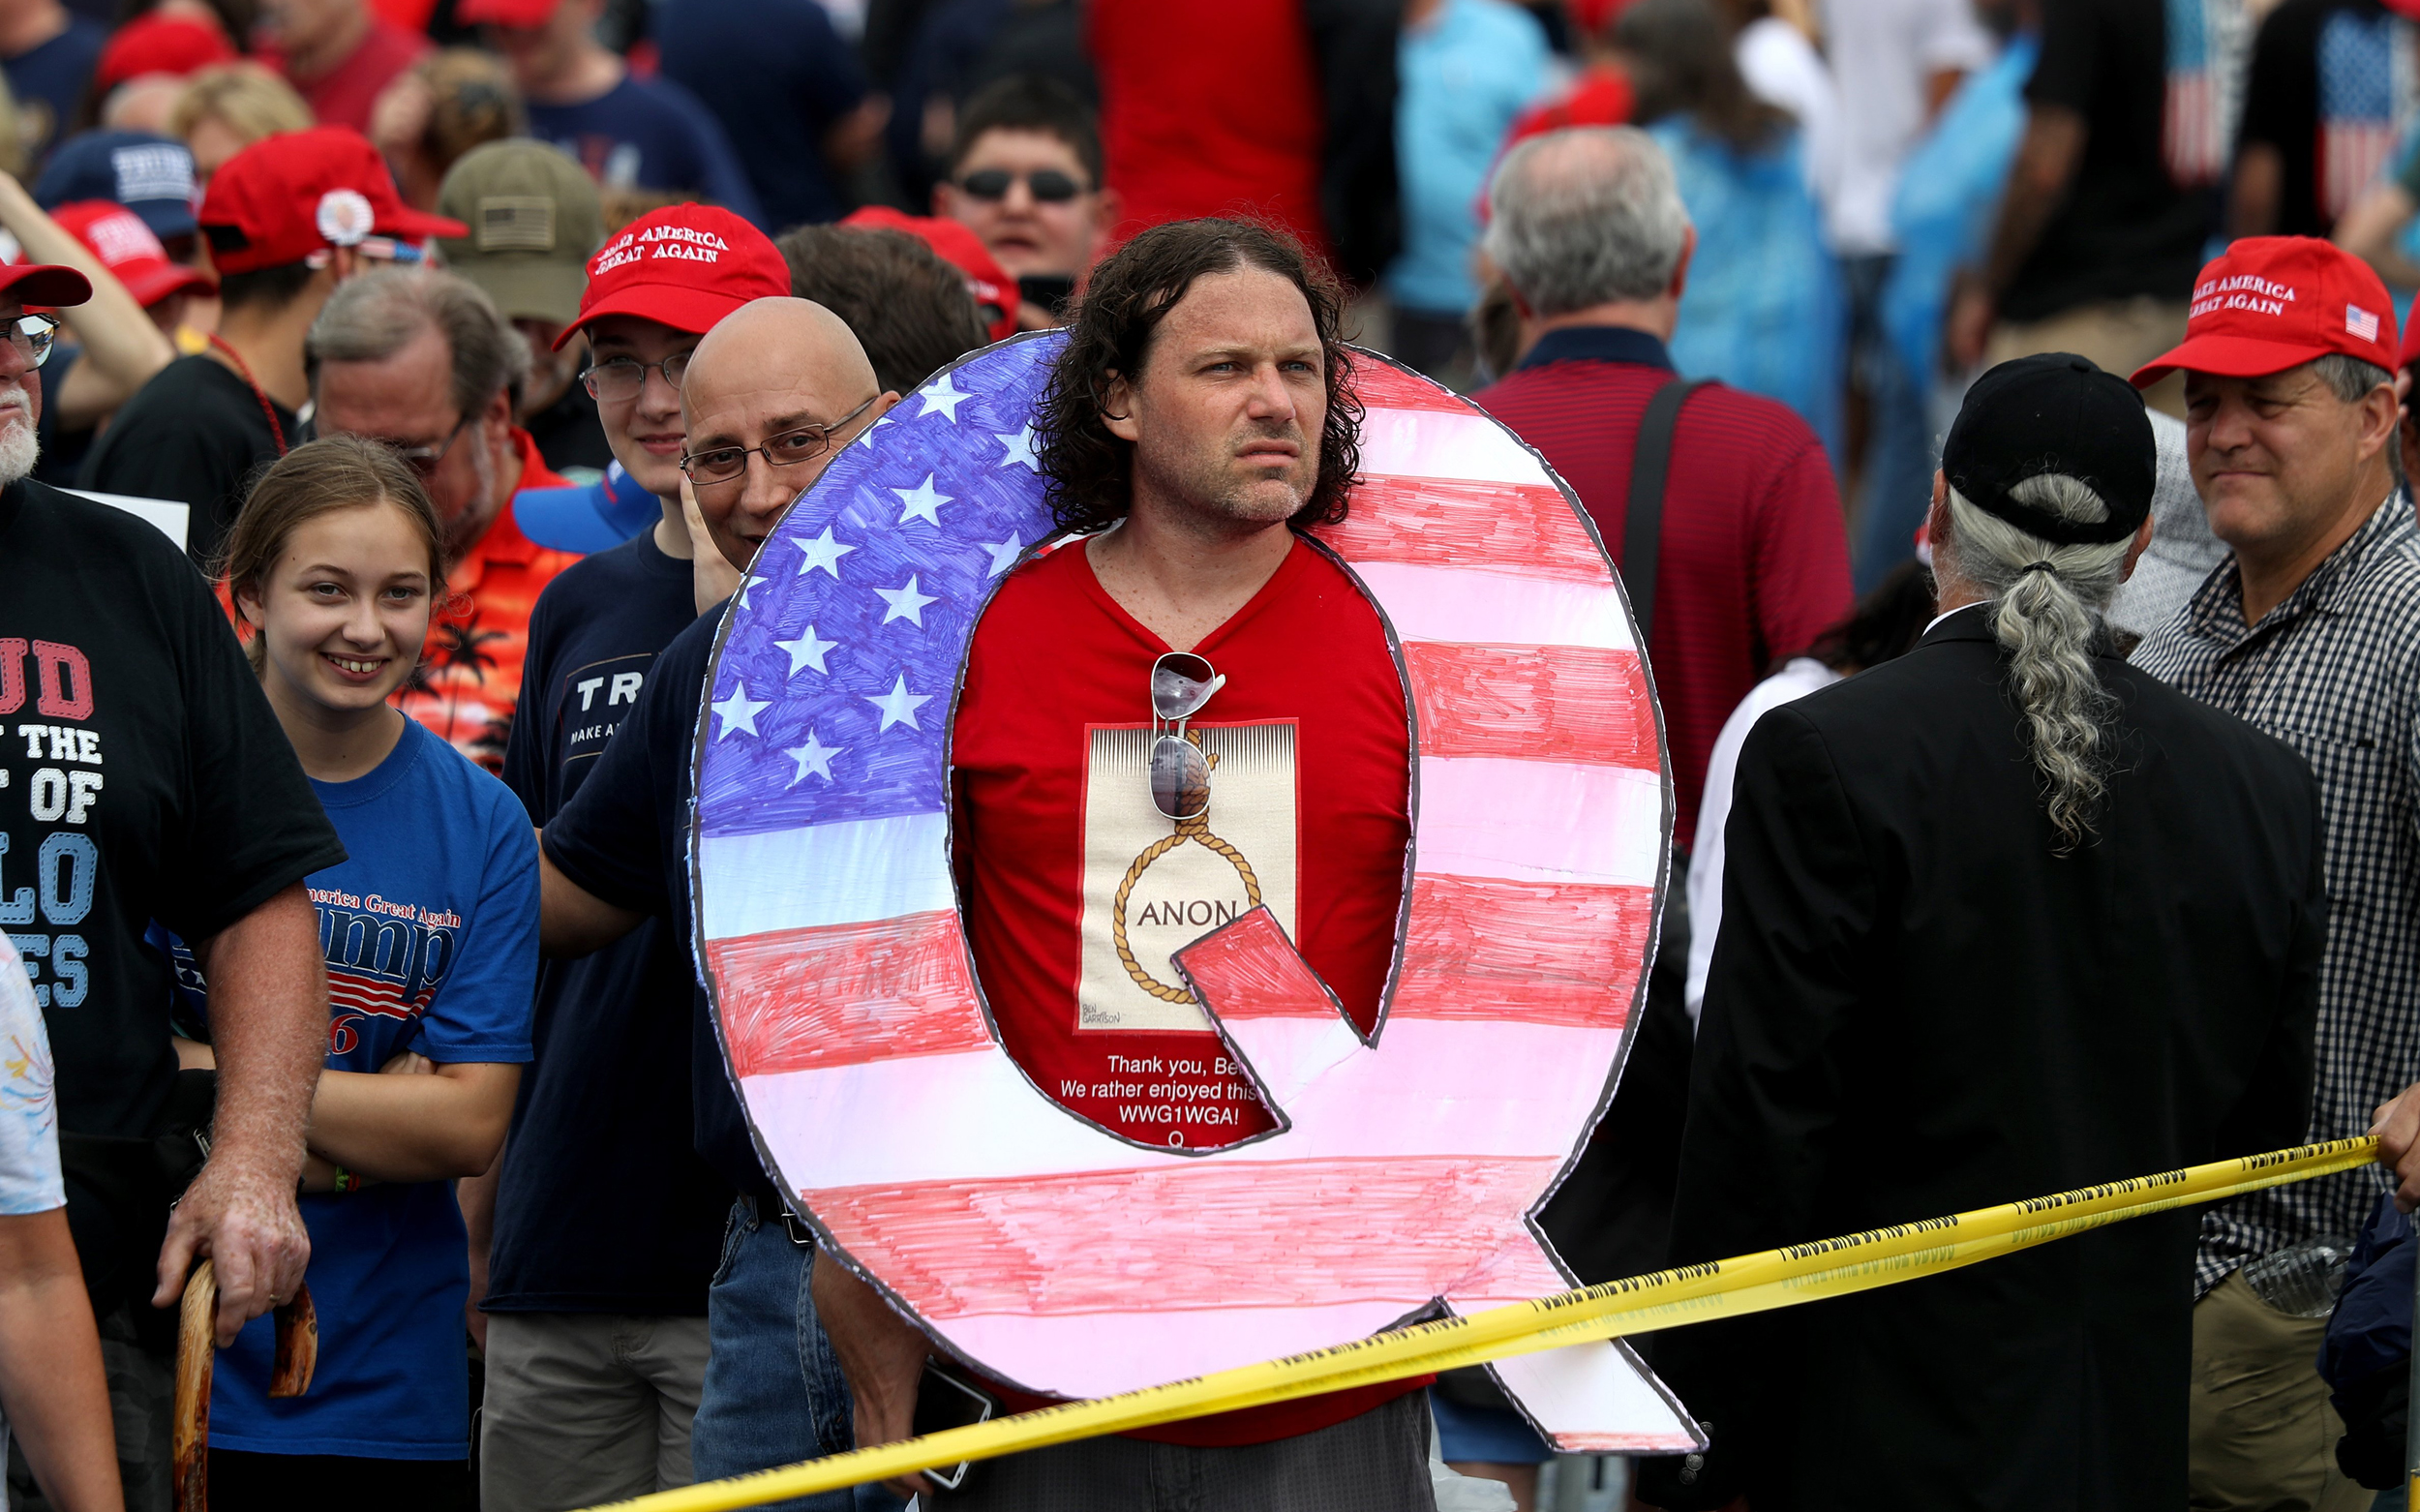 Image:  David Reinert holds a large “Q” sign while waiting to see Trump